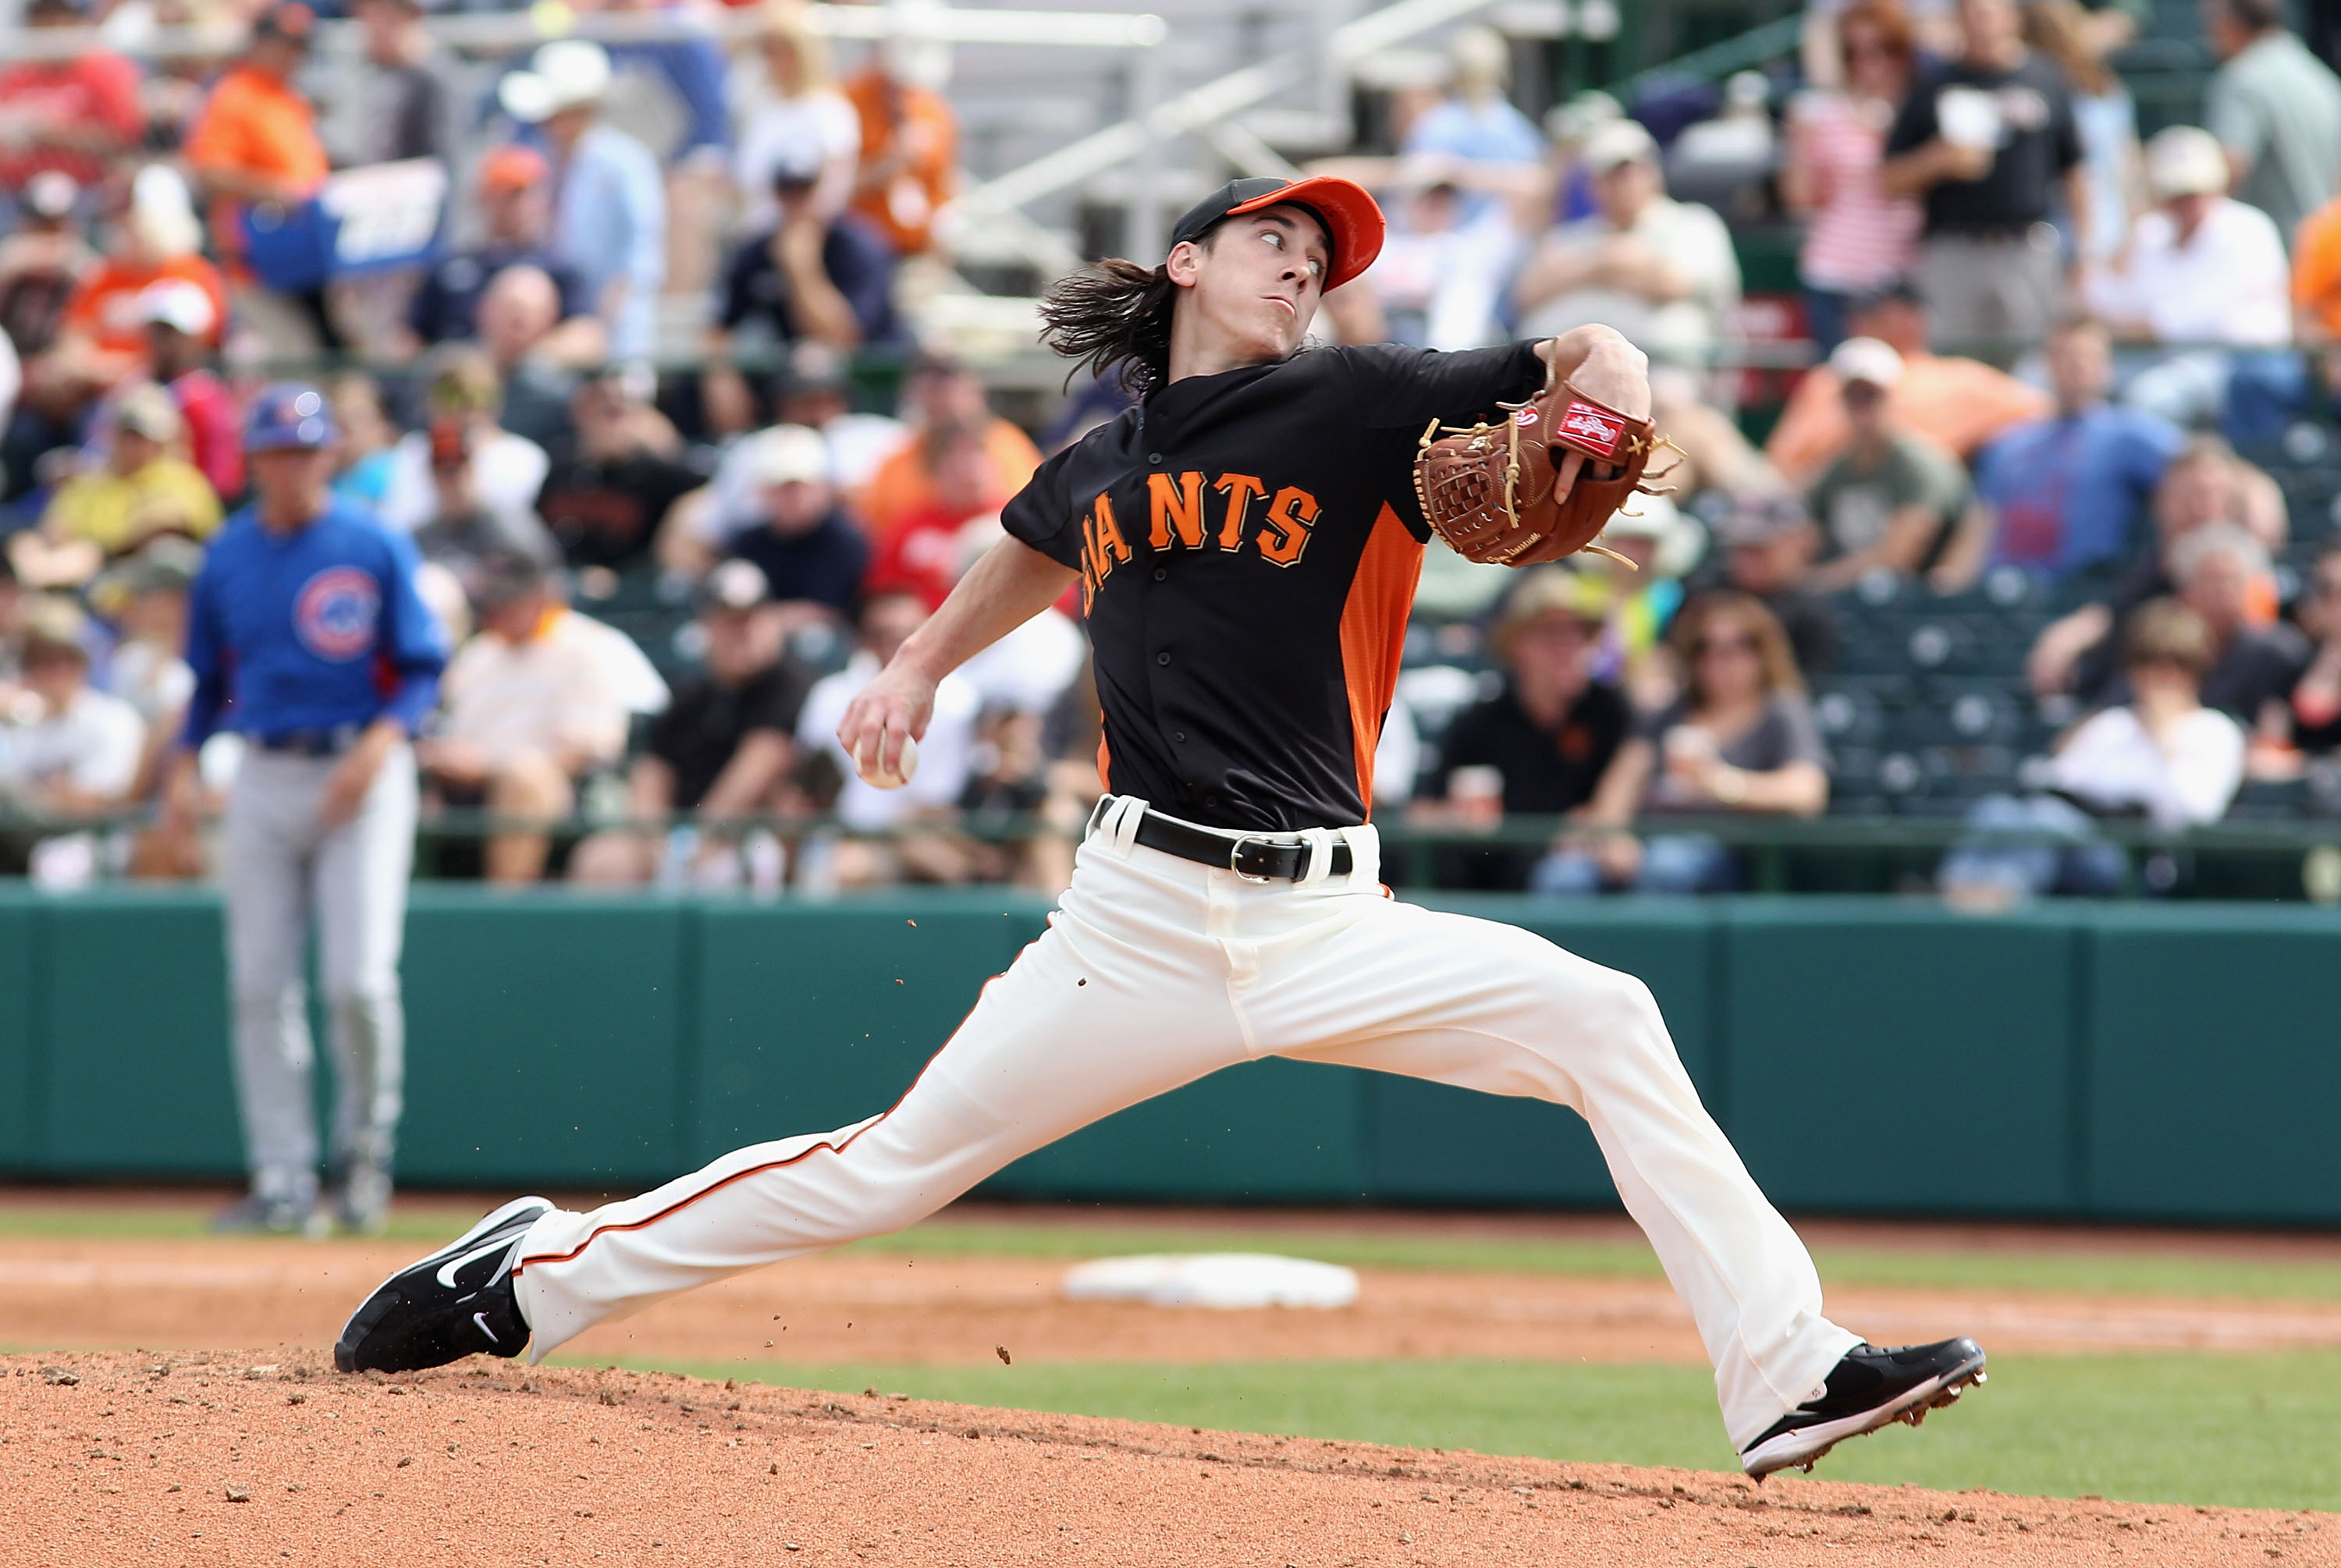 SCOTTSDALE, AZ - MARCH 01:  Starting pitcher Tim Lincecum #55 of the San Francisco Giants pitches against the Chicago Cubs during the spring training game at Scottsdale Stadium on March 1, 2011 in Scottsdale, Arizona.  (Photo by Christian Petersen/Getty I